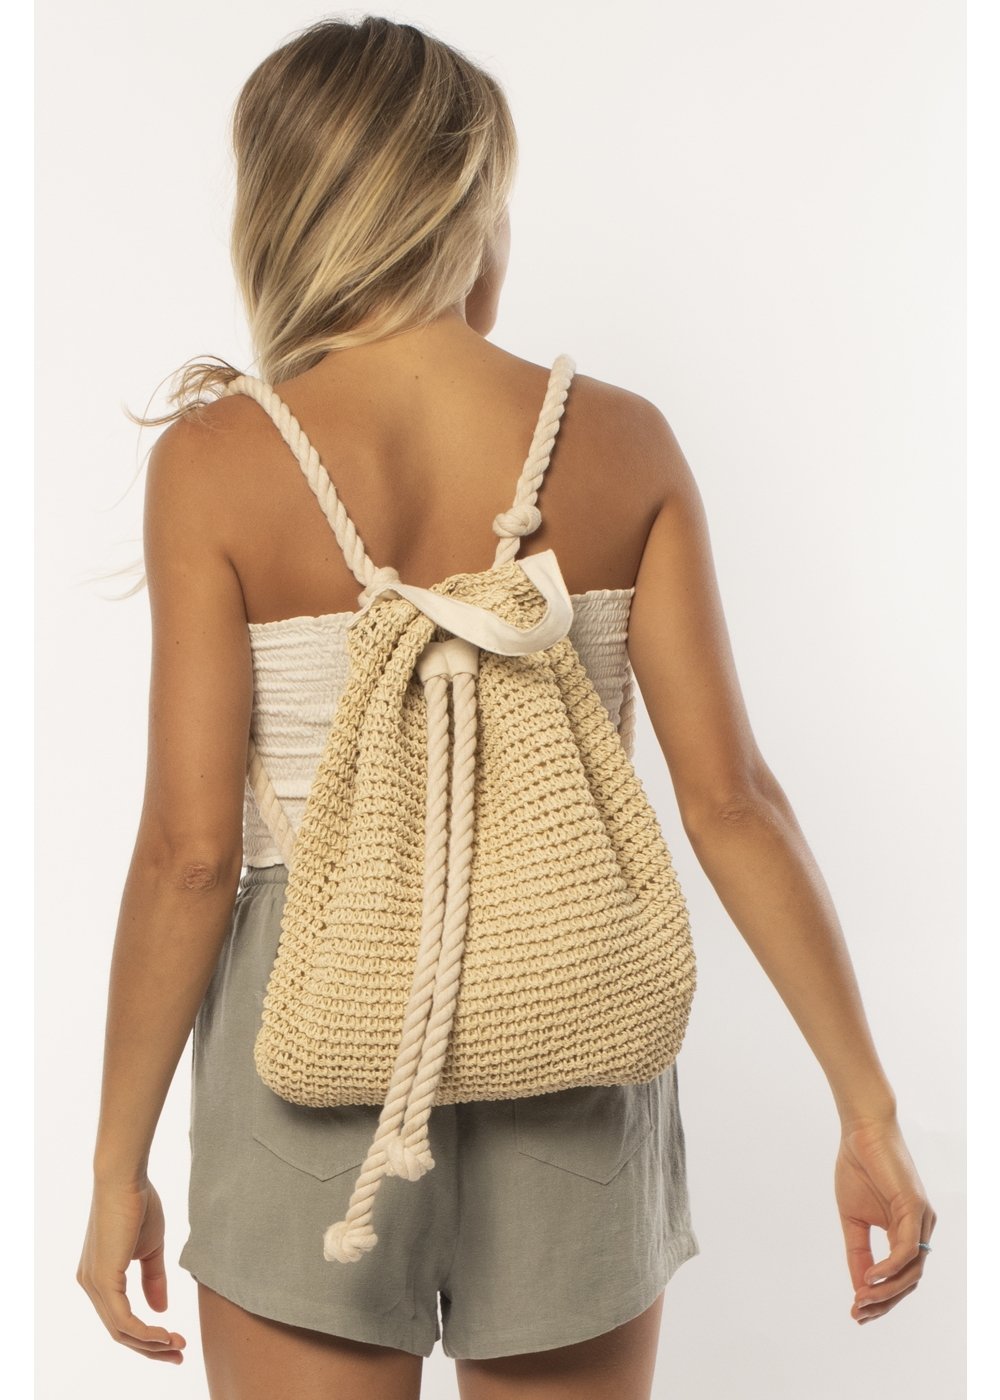 Beach You To It Backpack - Sisstrevolution